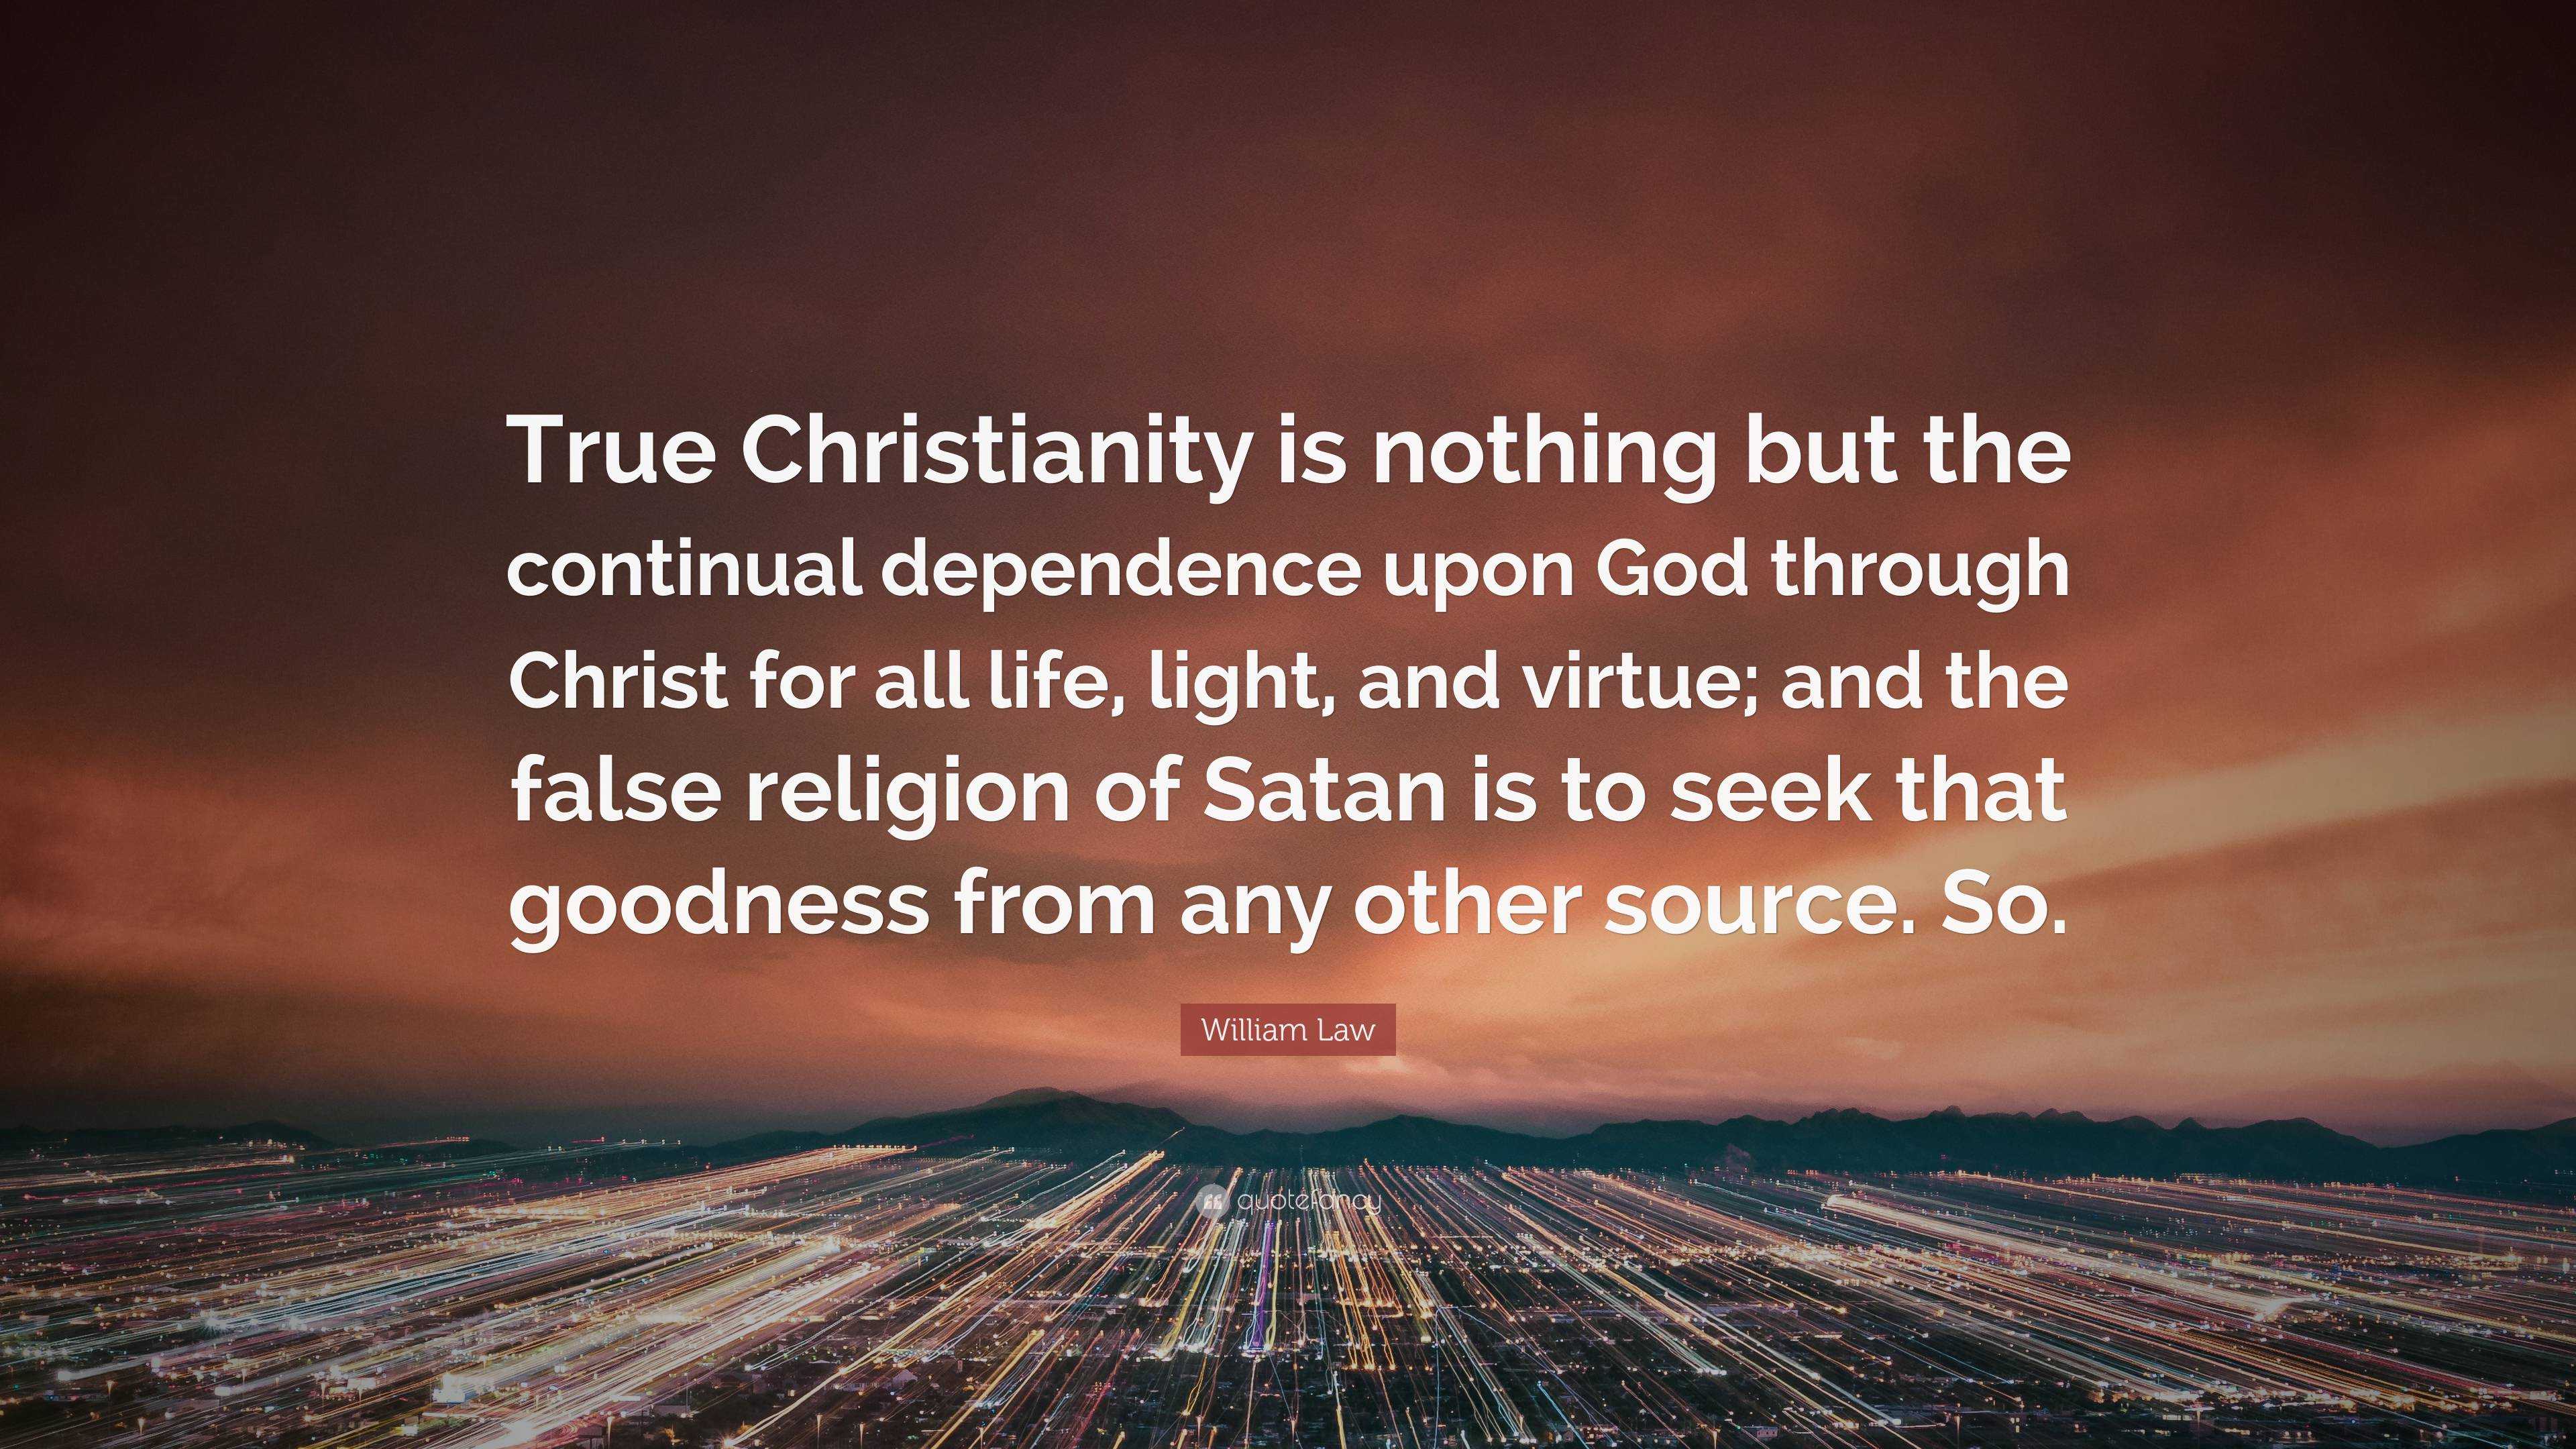 William Law Quote: “True Christianity is nothing but the continual ...